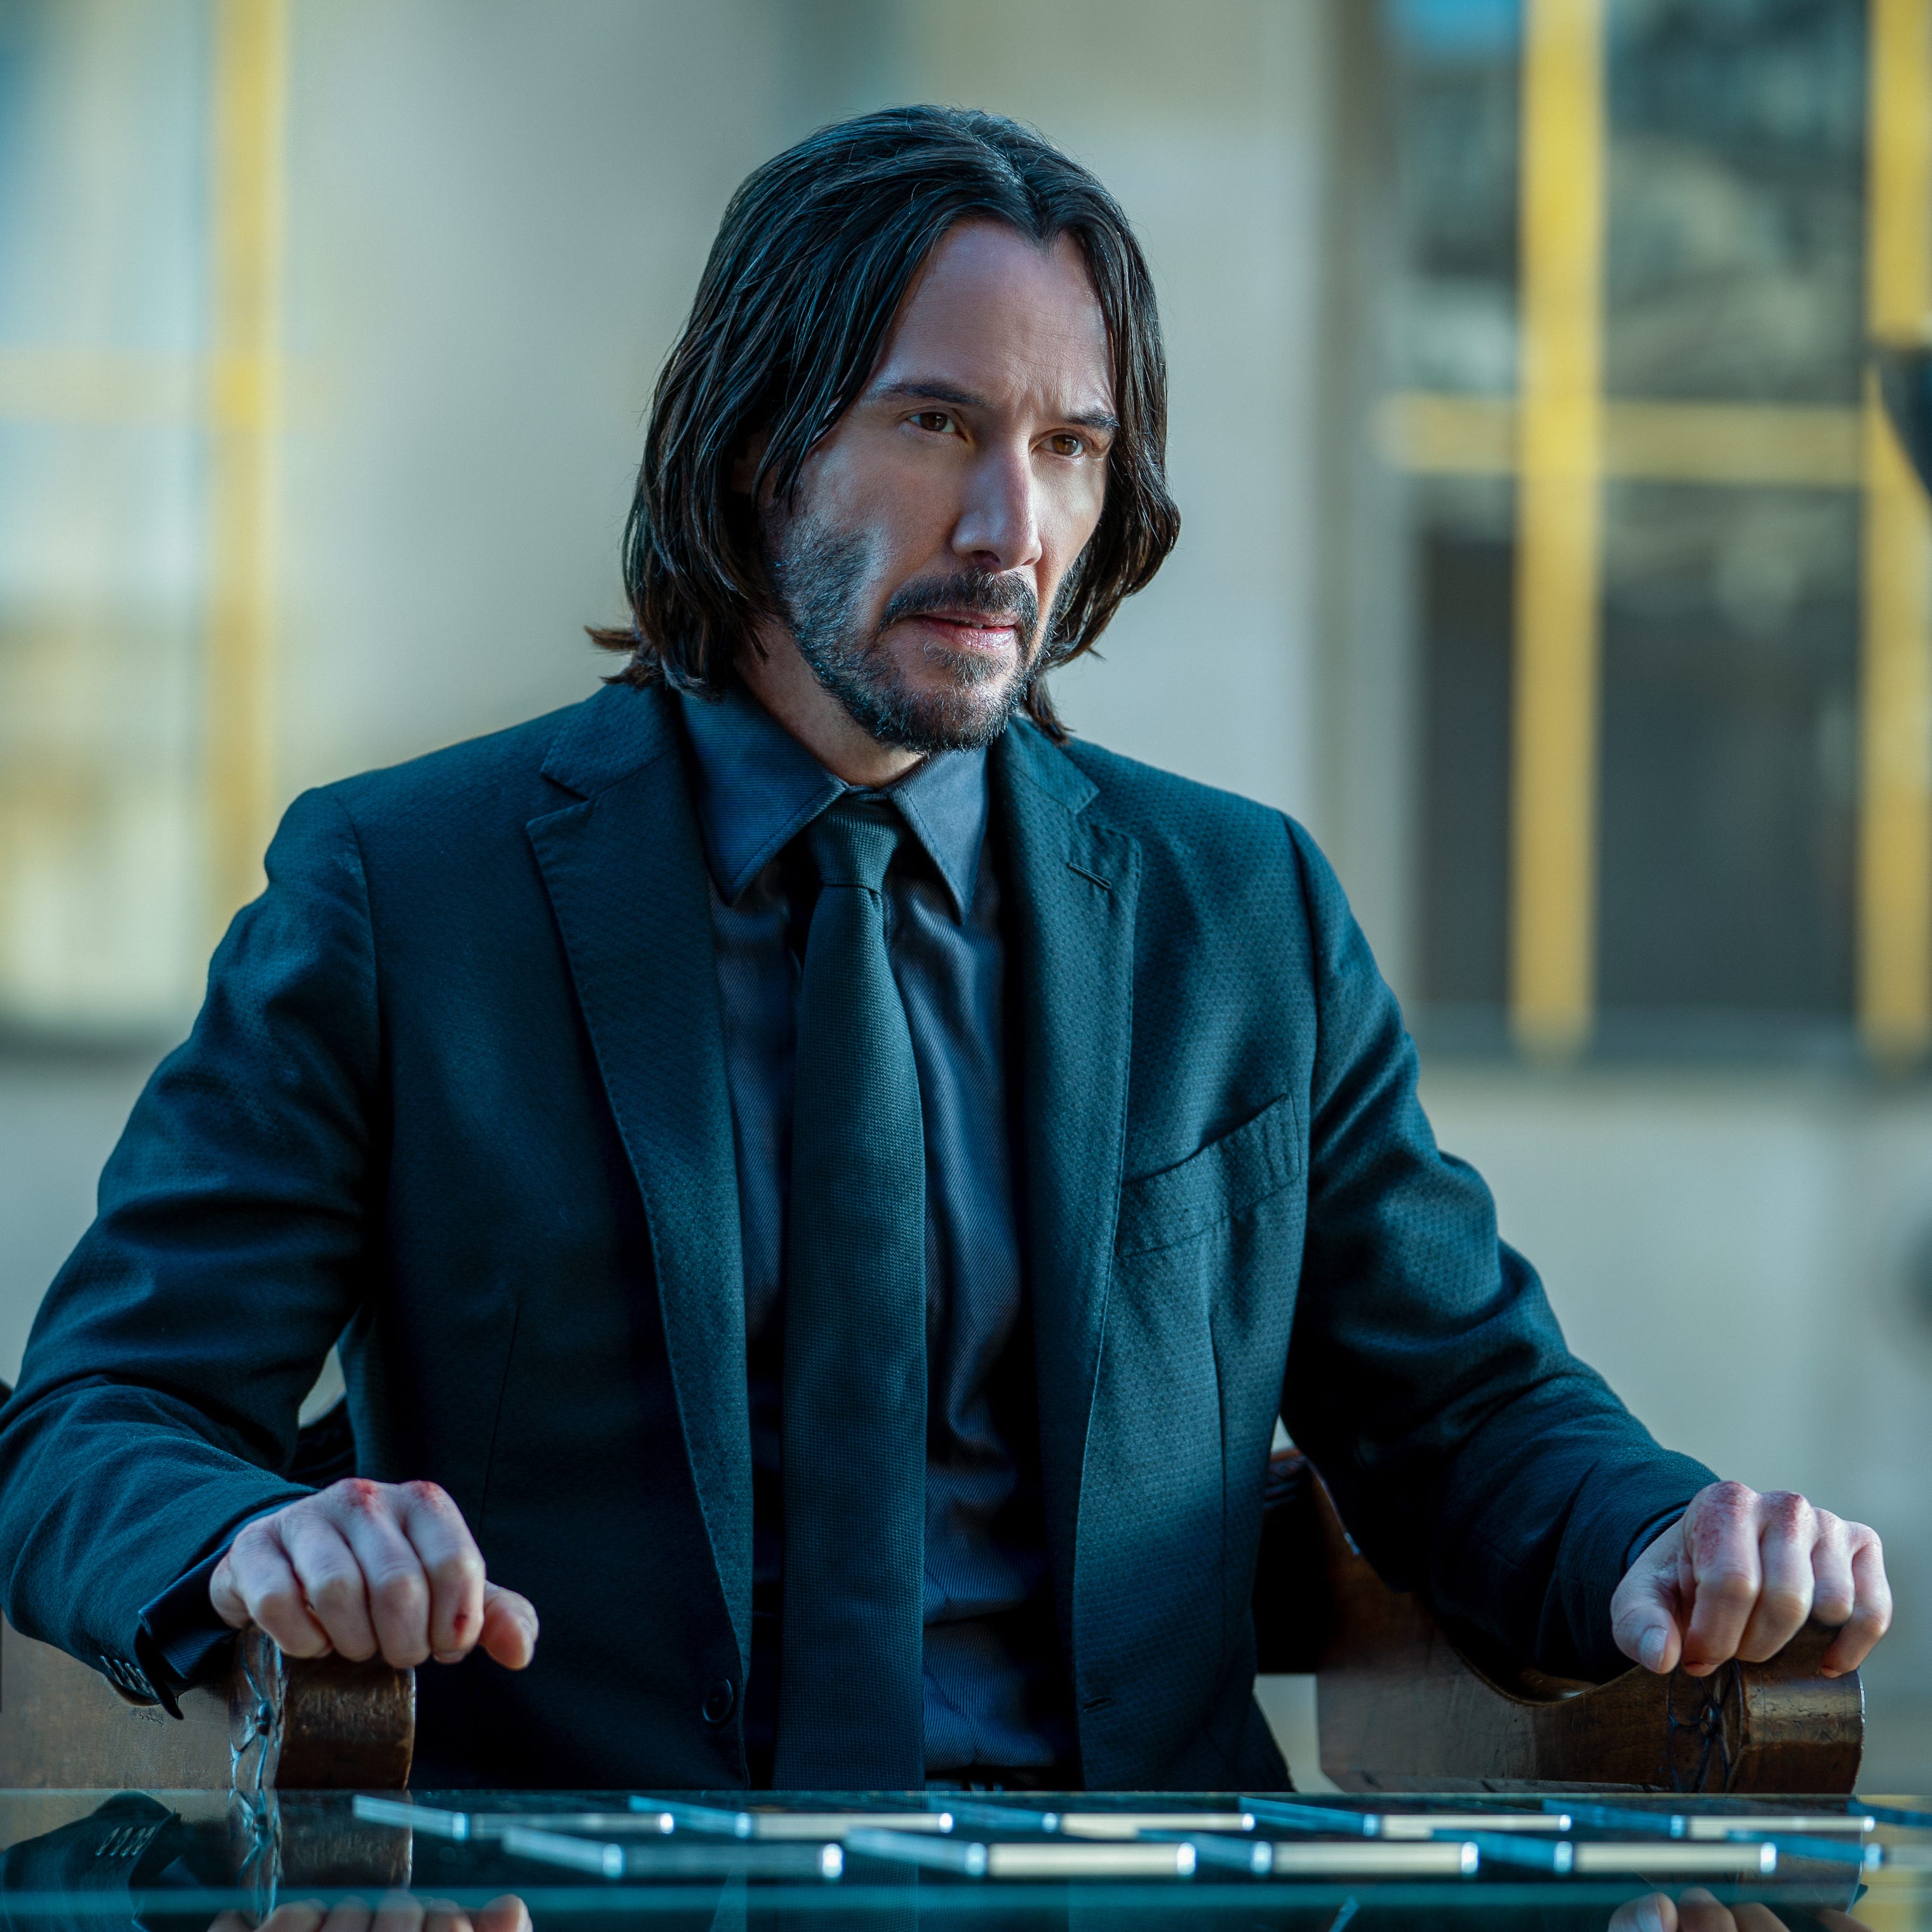 Keanu Reeves reprises his role as the title hitman in "John Wick: Chapter 4."